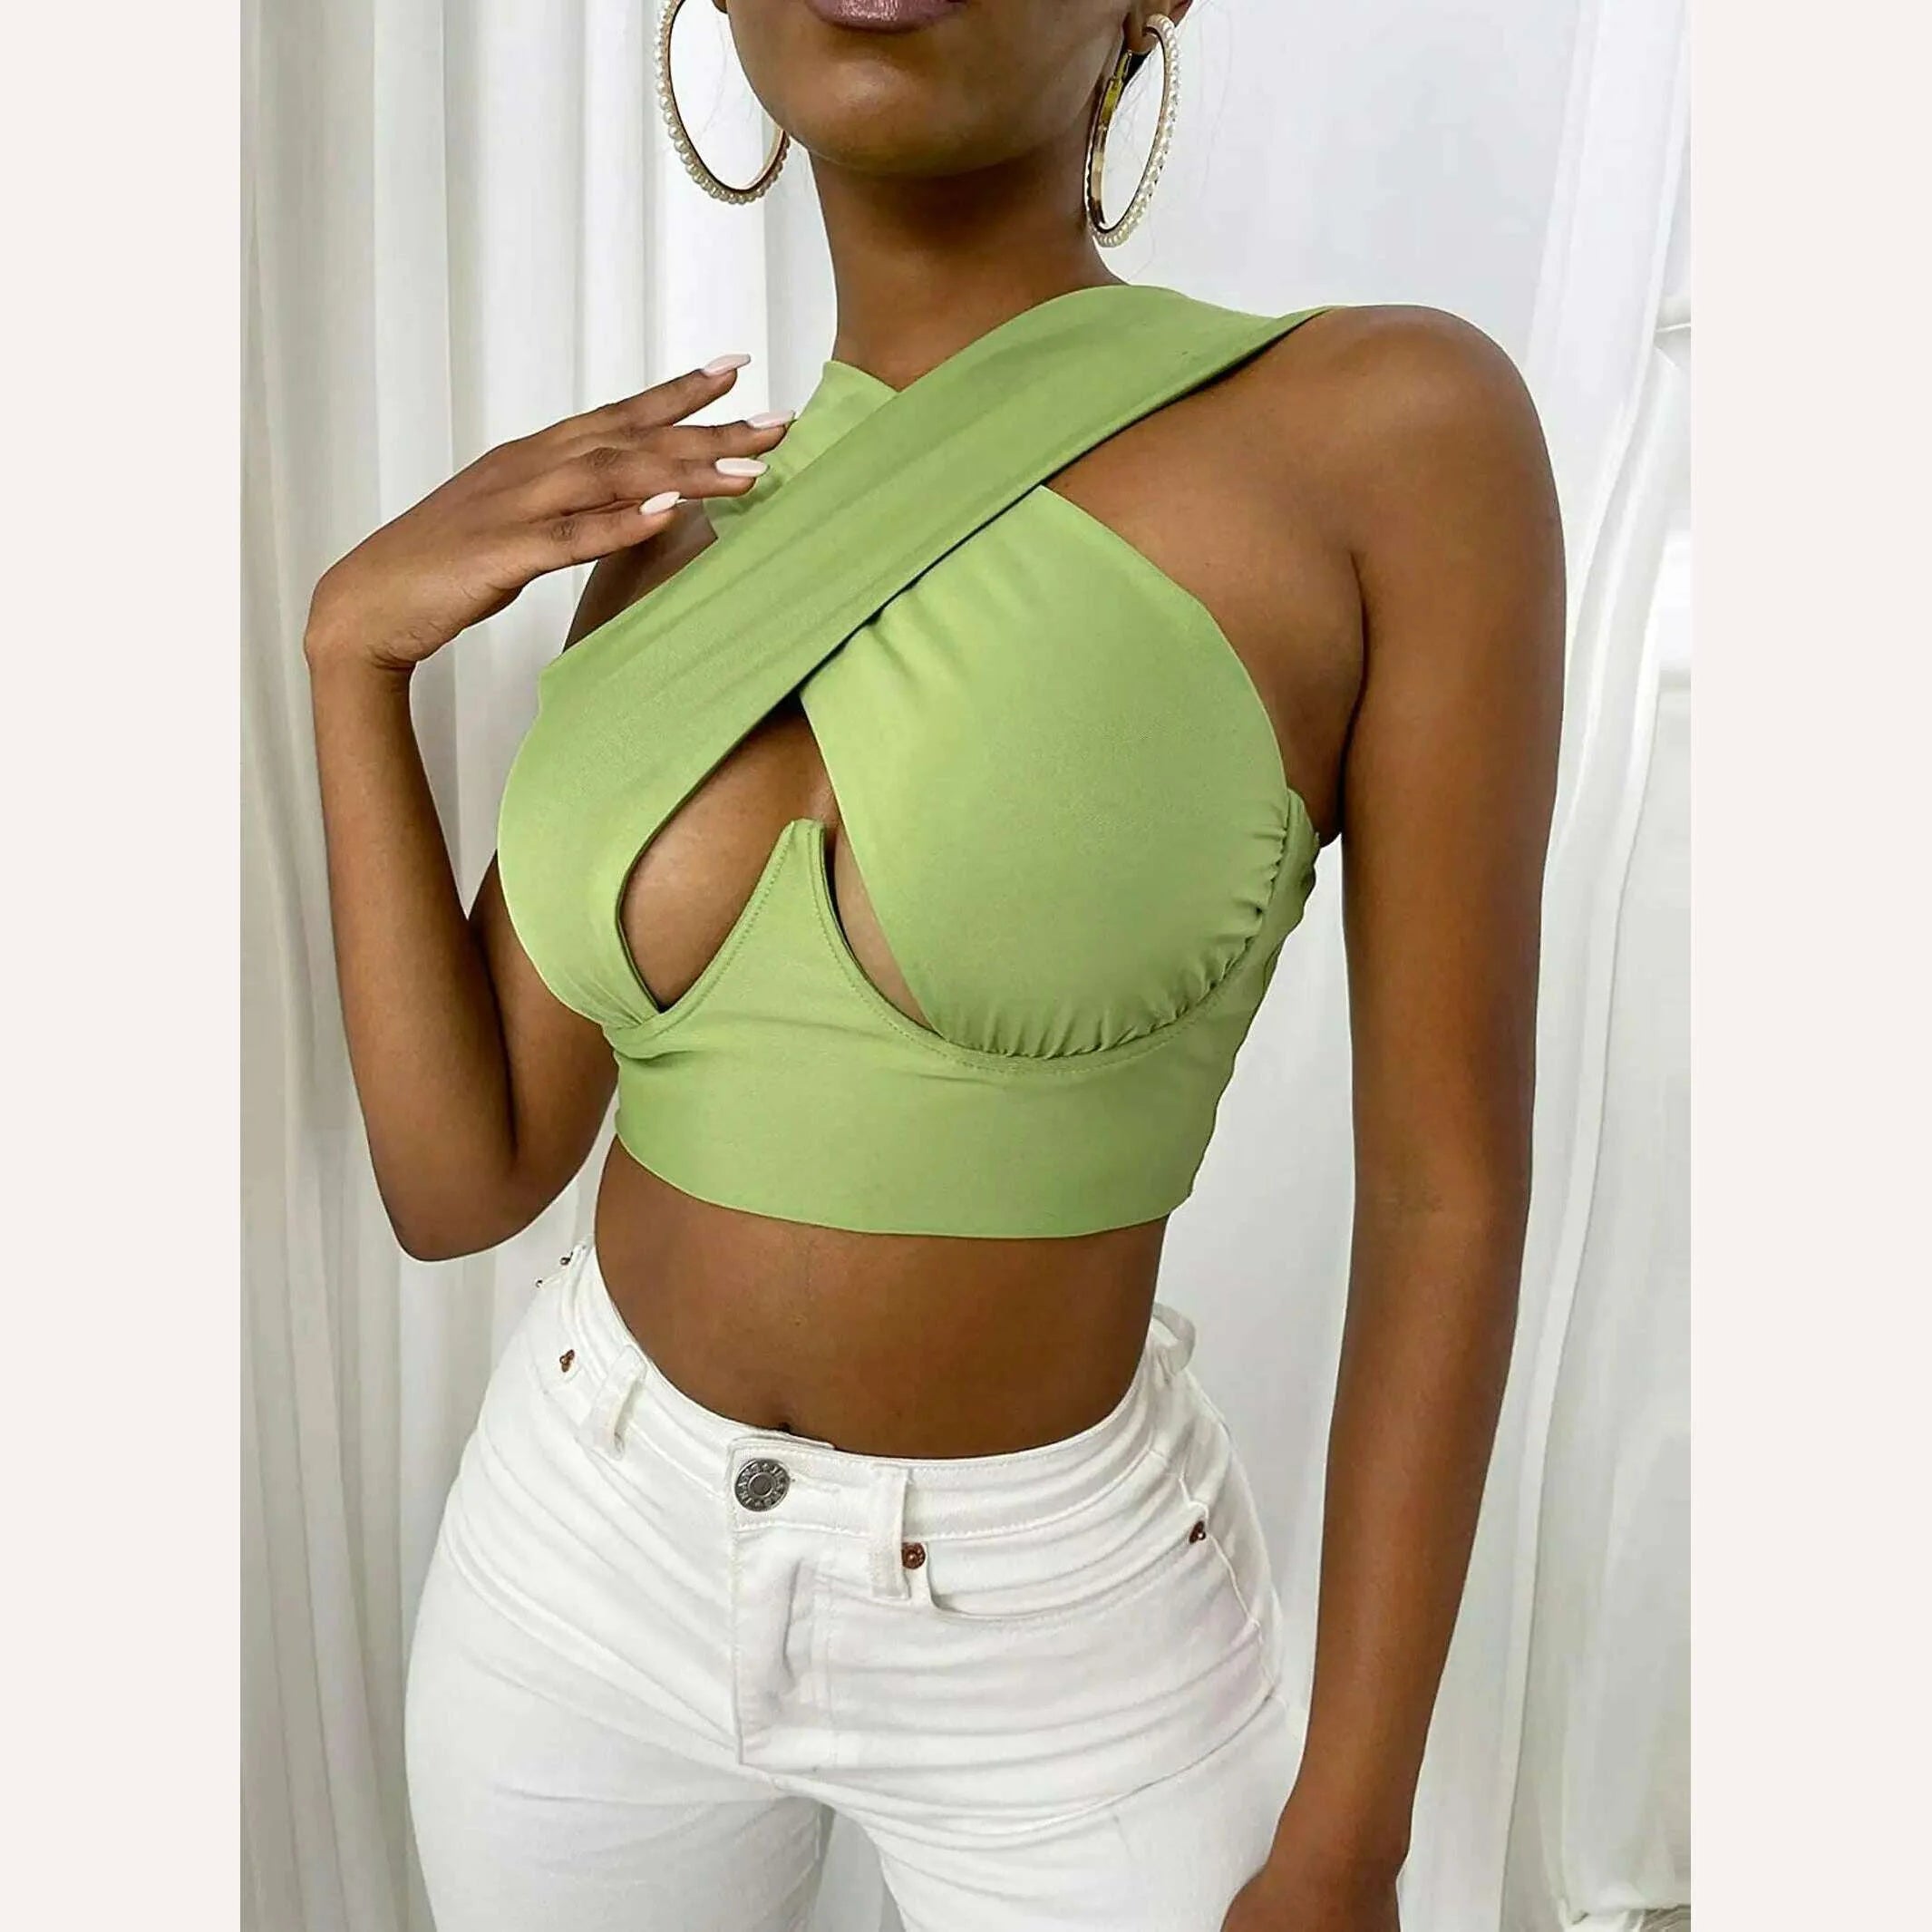 Women's Criss Cross Tank Tops Sexy Sleeveless Solid Color Cutout Front Crop Tops Party Club Streetwear Summer Lady Bustier Tops